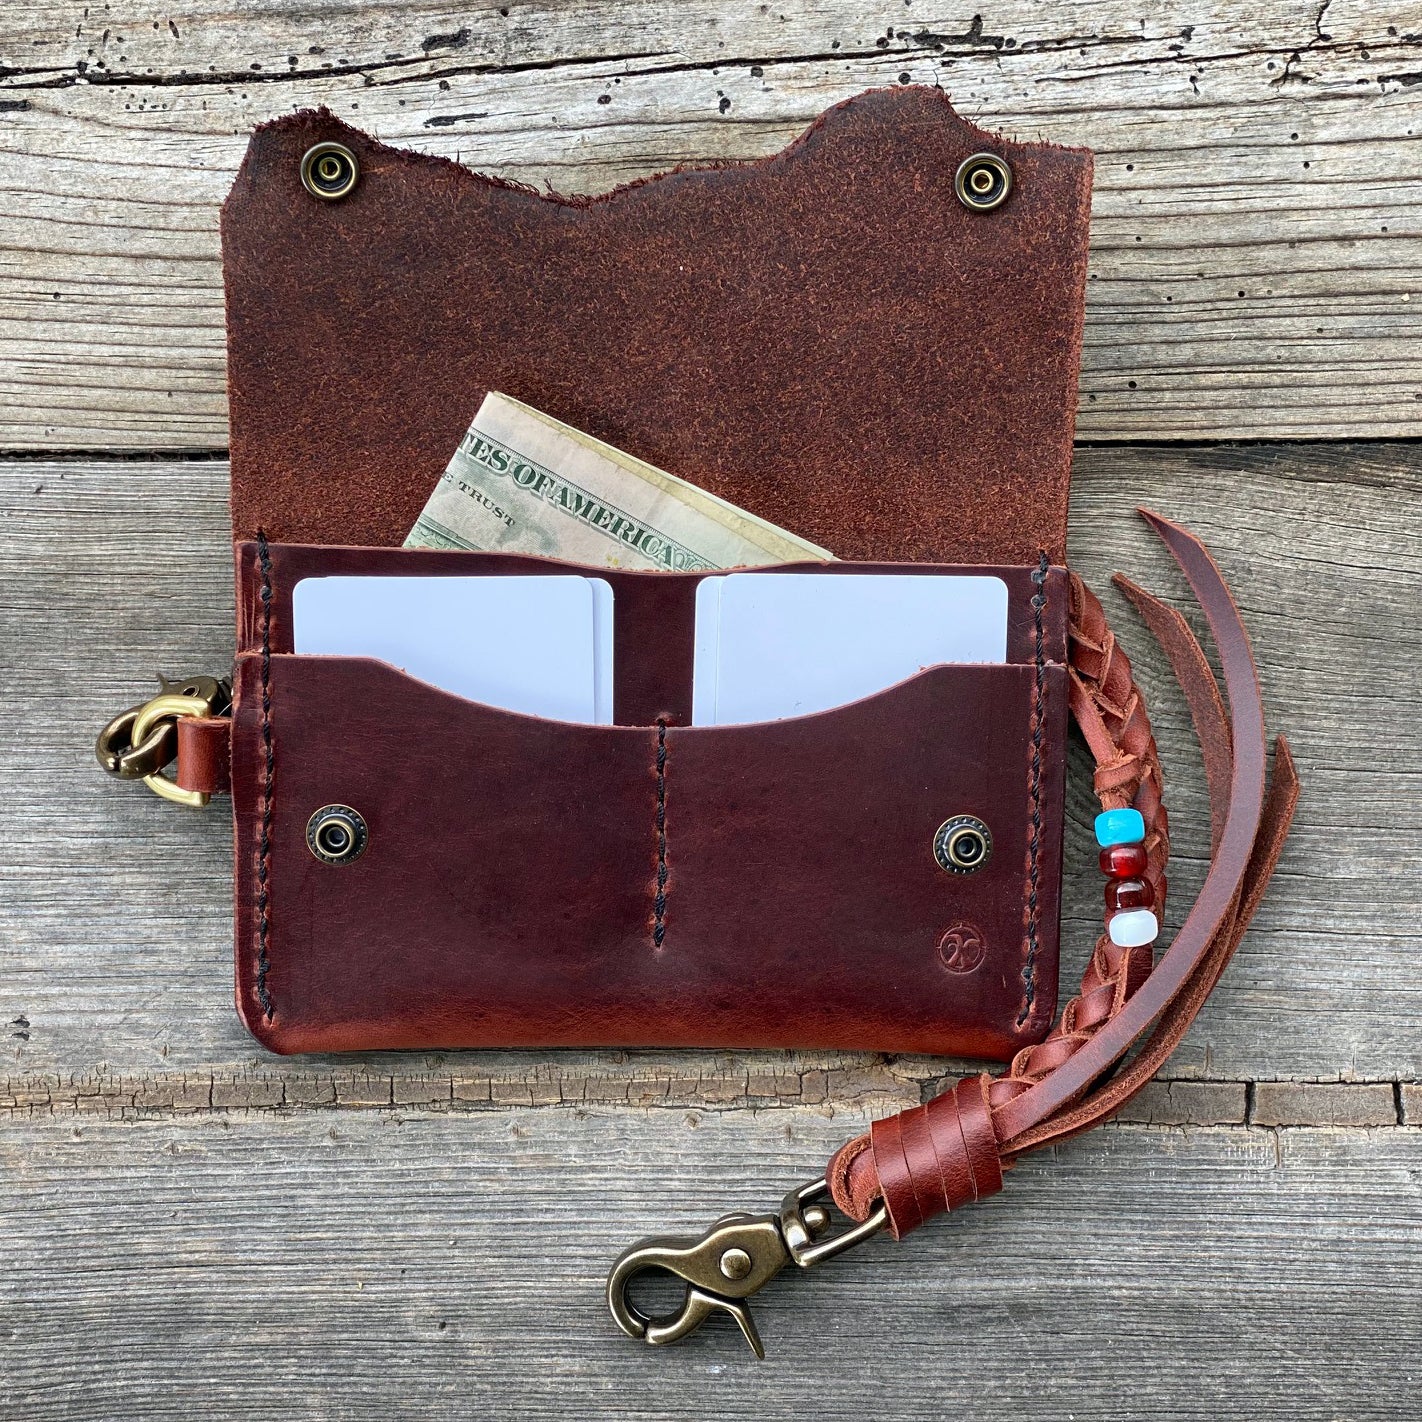 Hand crafted mid sized leather trucker wallet open showing money and cards